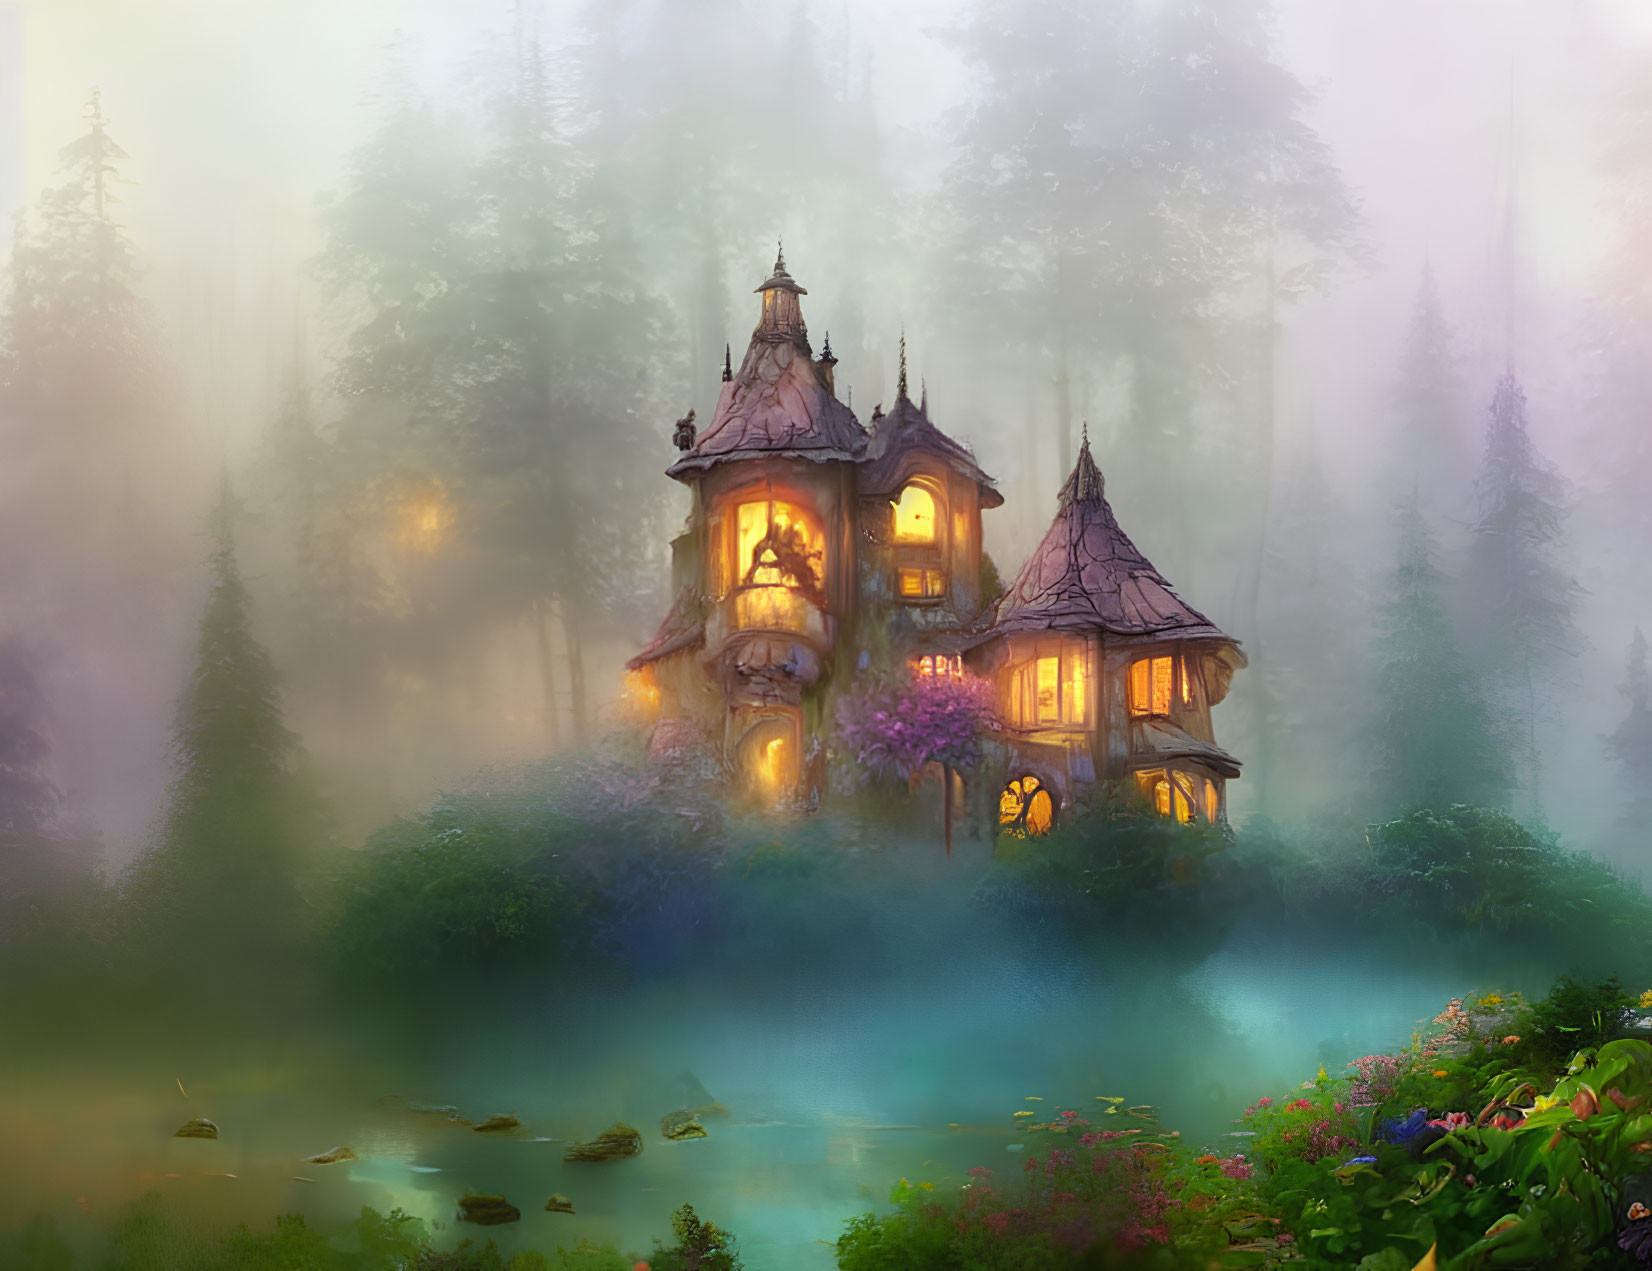 Enchanting fairytale cottage in misty forest by serene pond